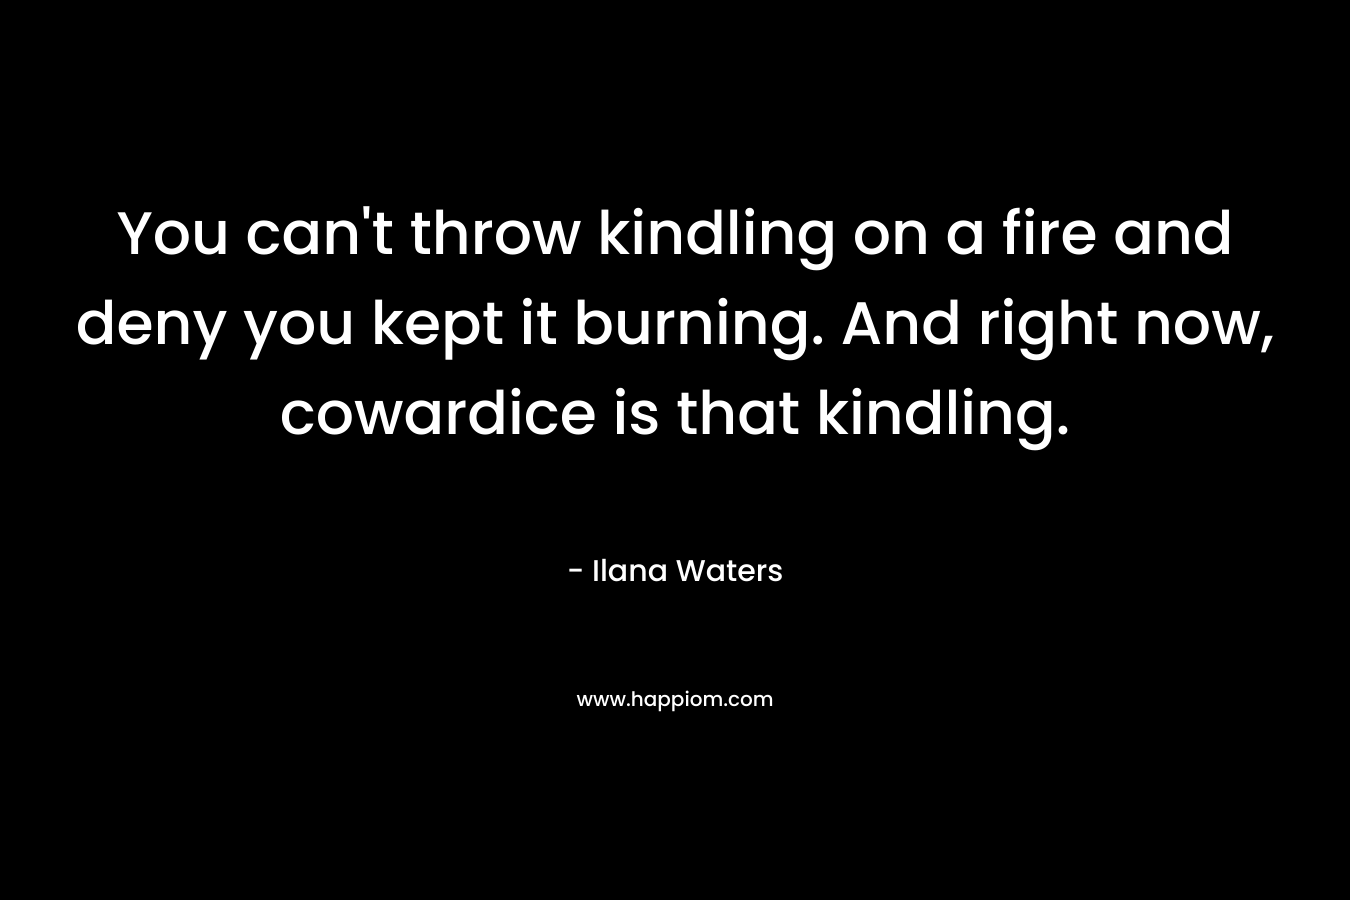 You can’t throw kindling on a fire and deny you kept it burning. And right now, cowardice is that kindling. – Ilana Waters